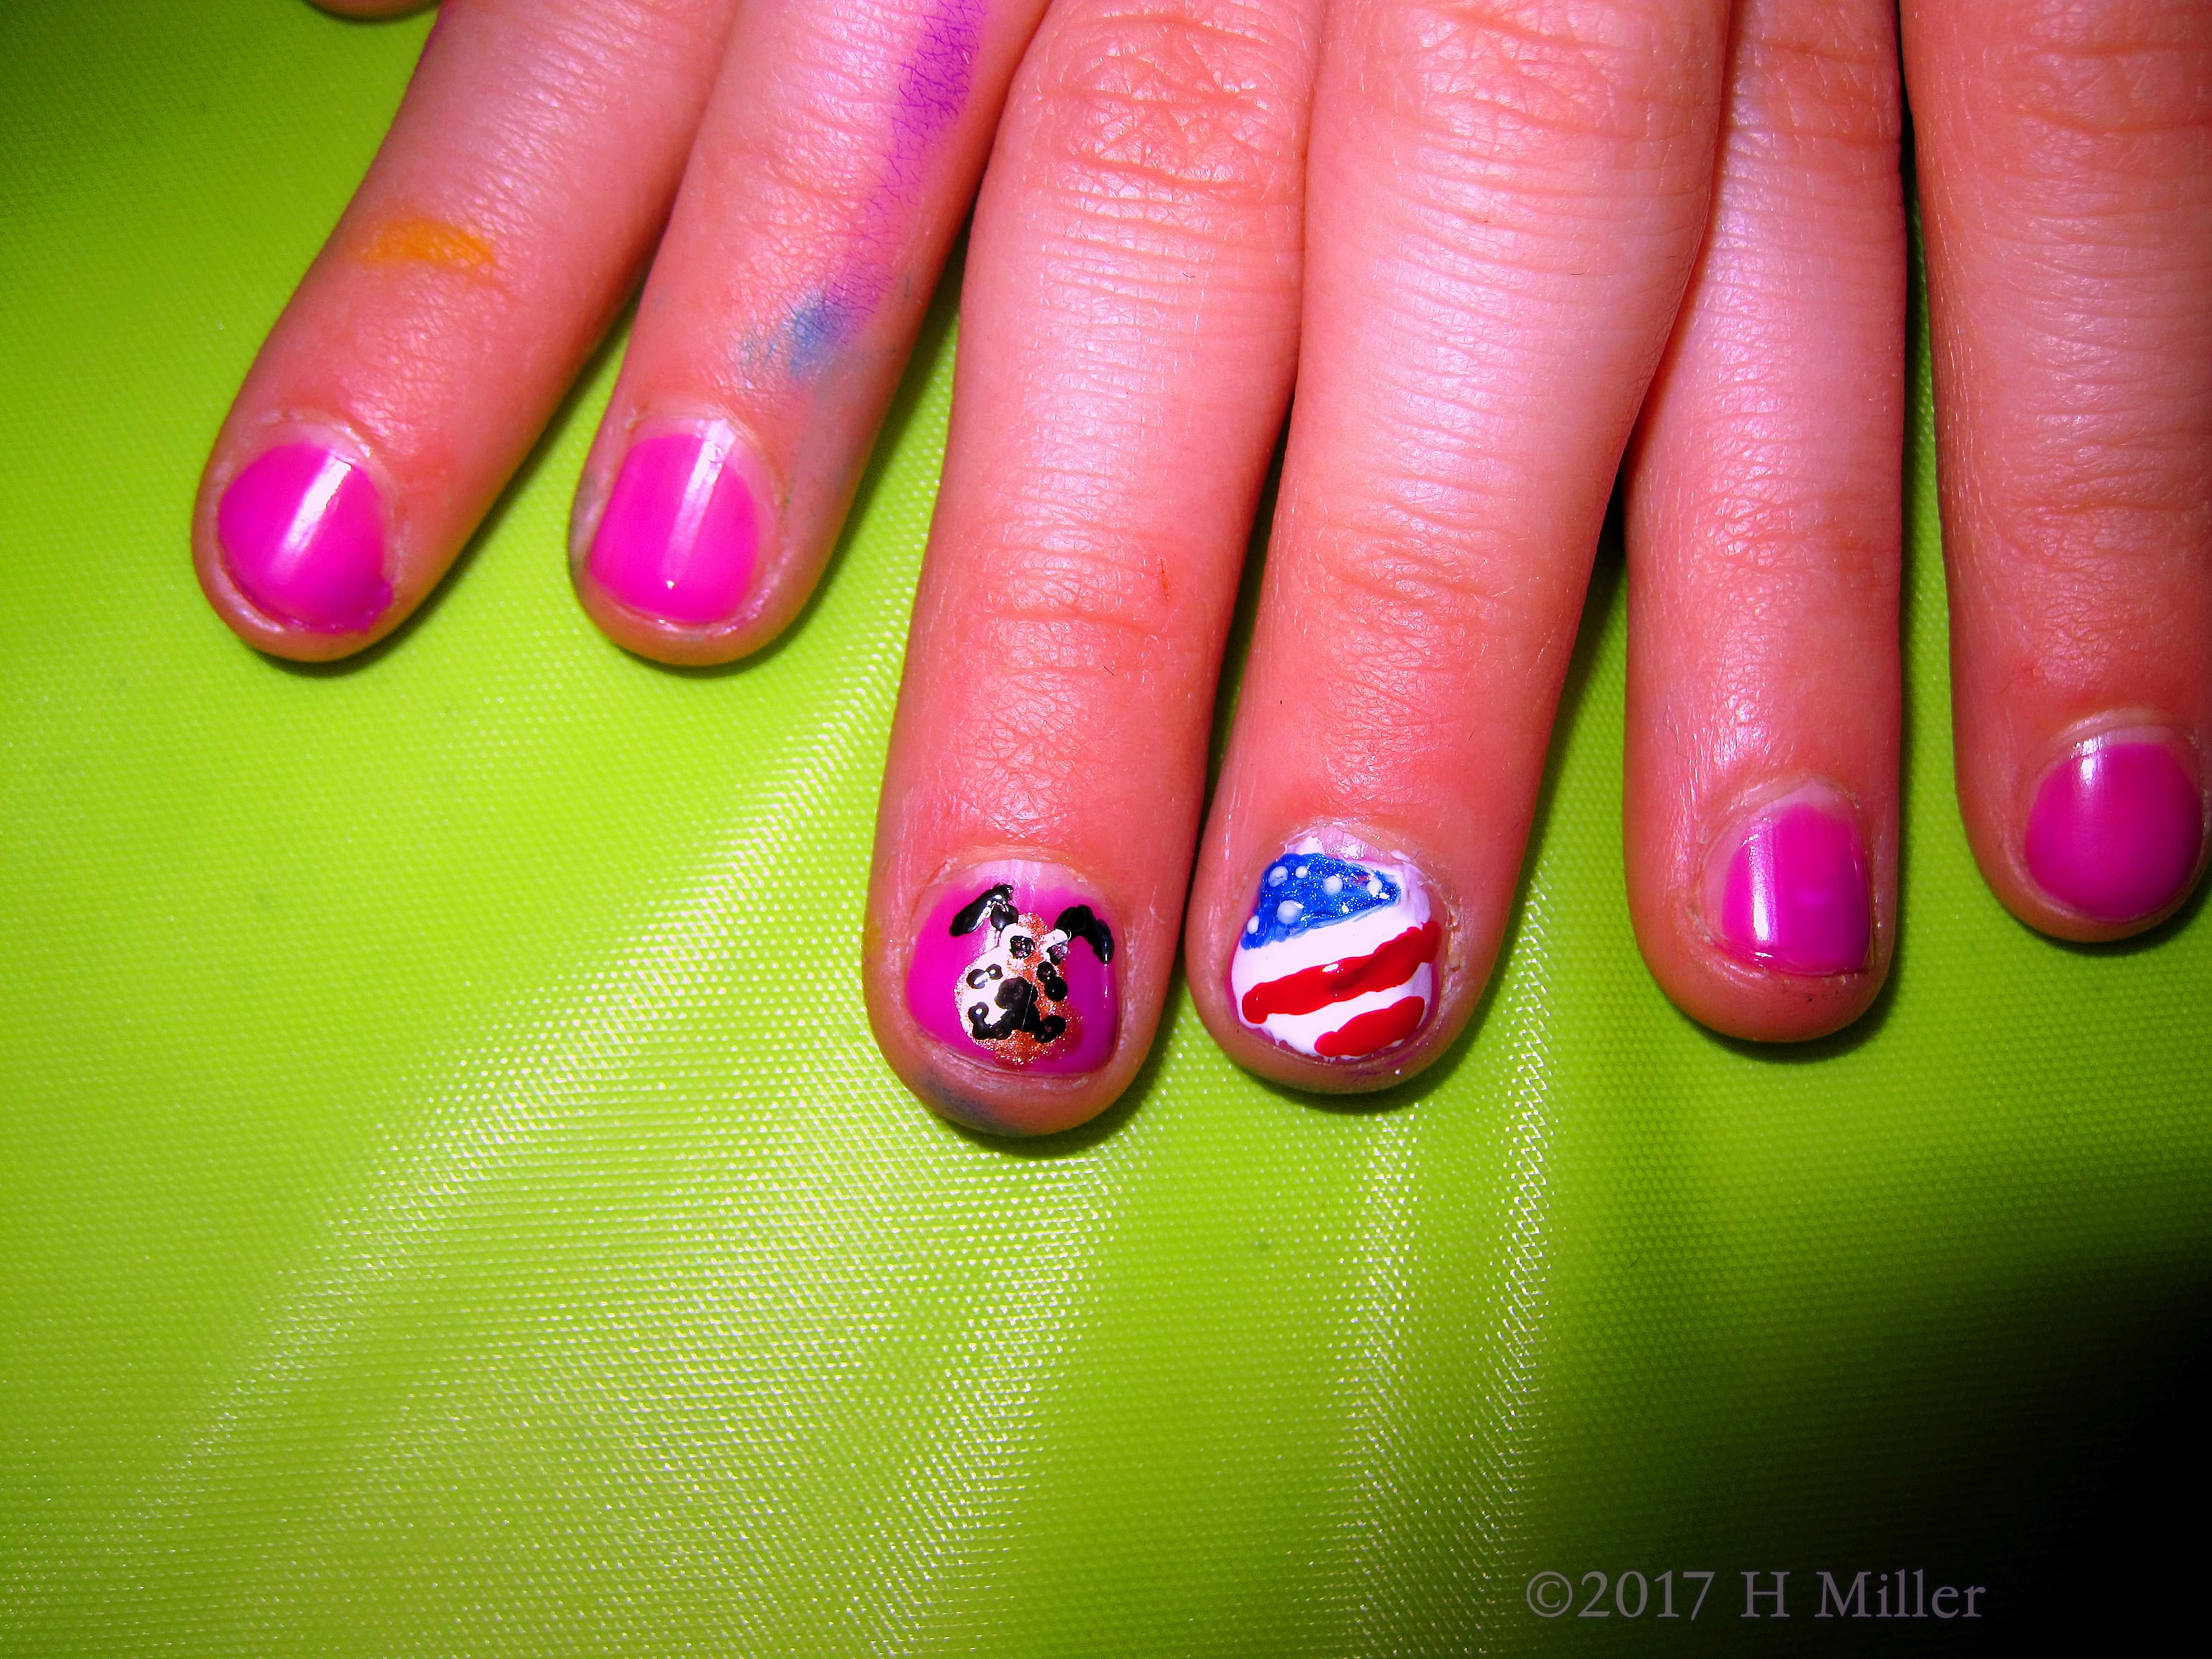 Pink Girls Mani With An Adorable Nail Art Design Of Dogs And American Flags. 